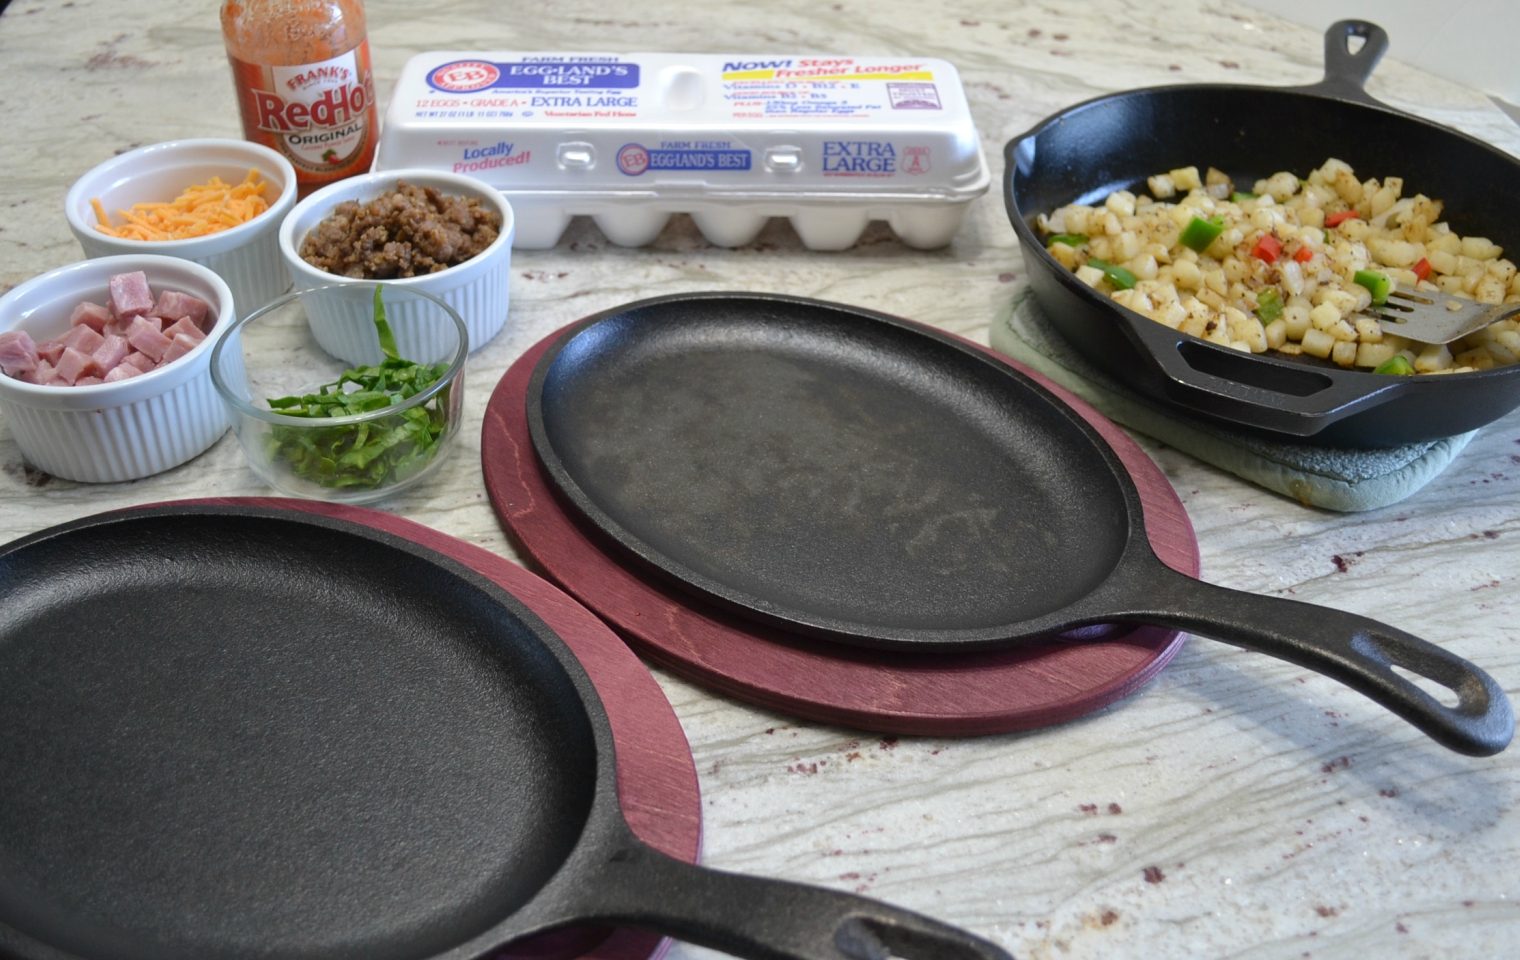 St. Patrick's Day breakfast skillets packed with eggs, meats, veggies, and cheese.